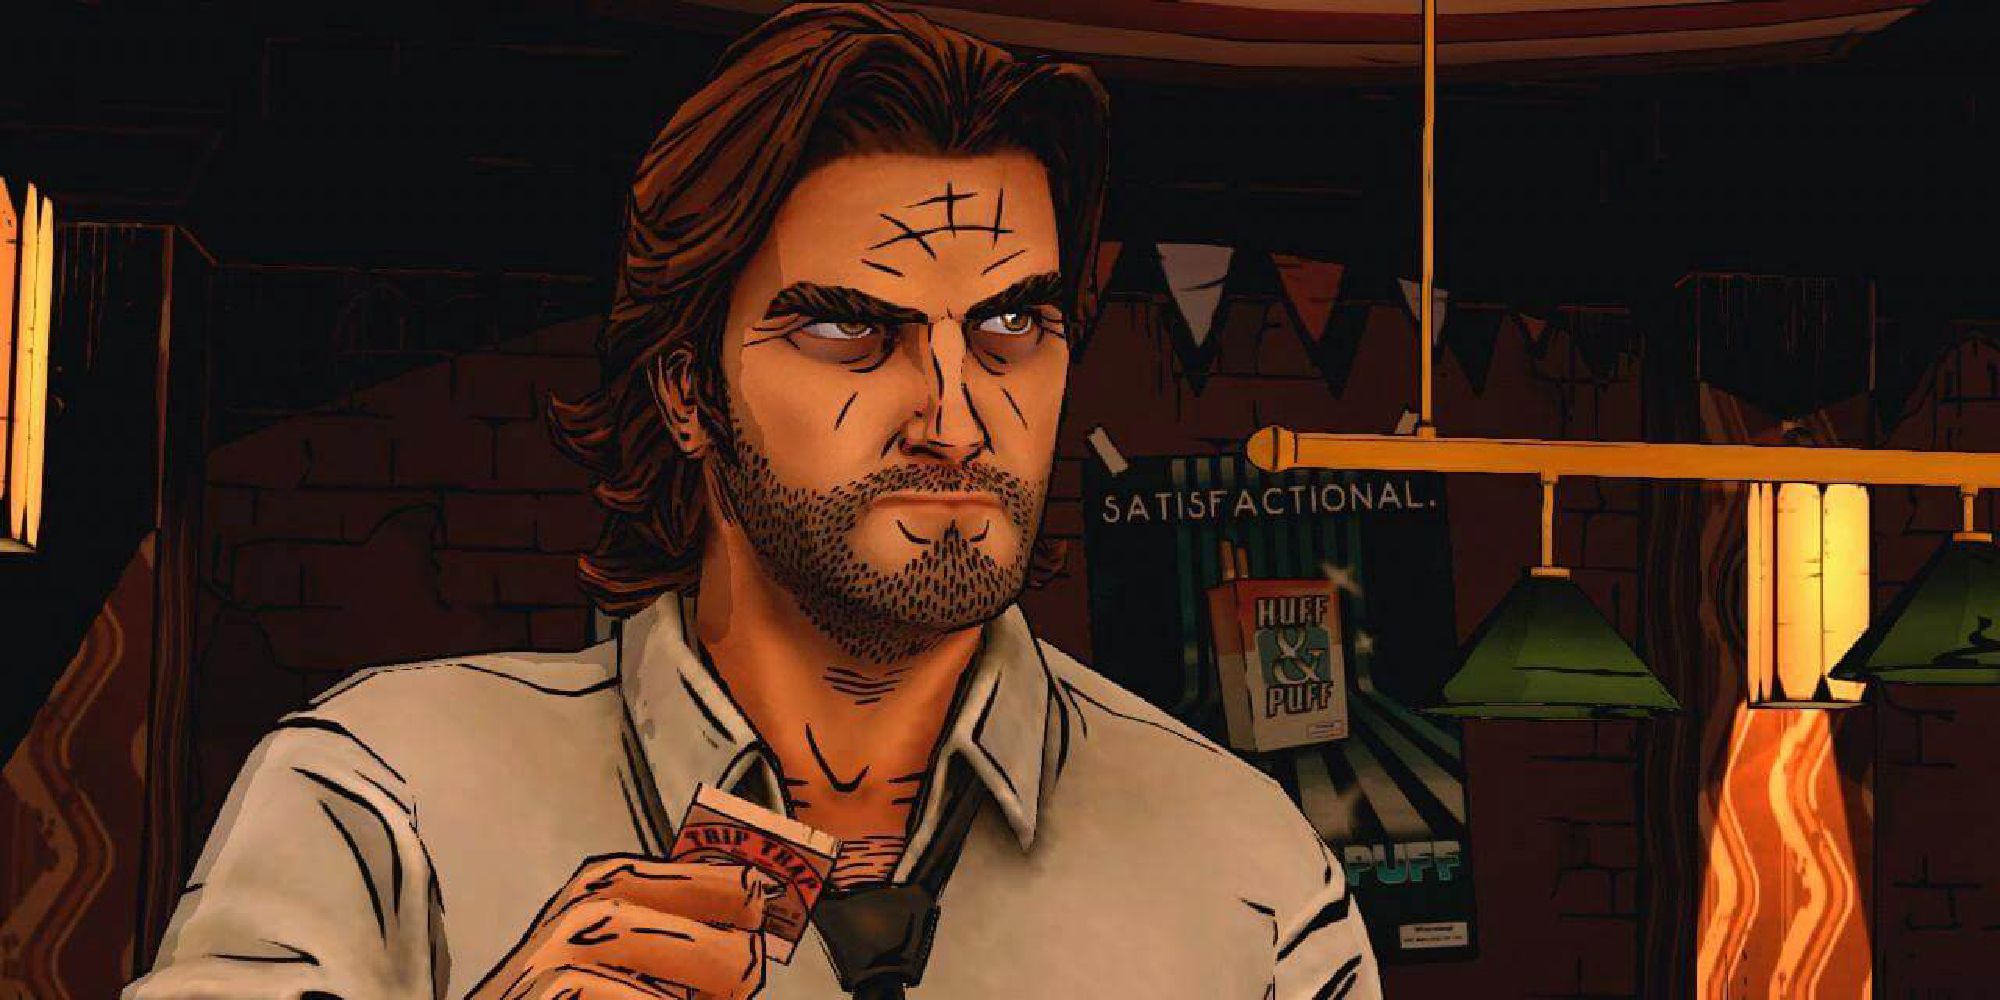 Bigby Wolf stands in a air, fixing a character off screen with a look of suspicion in The Wolf Among Us